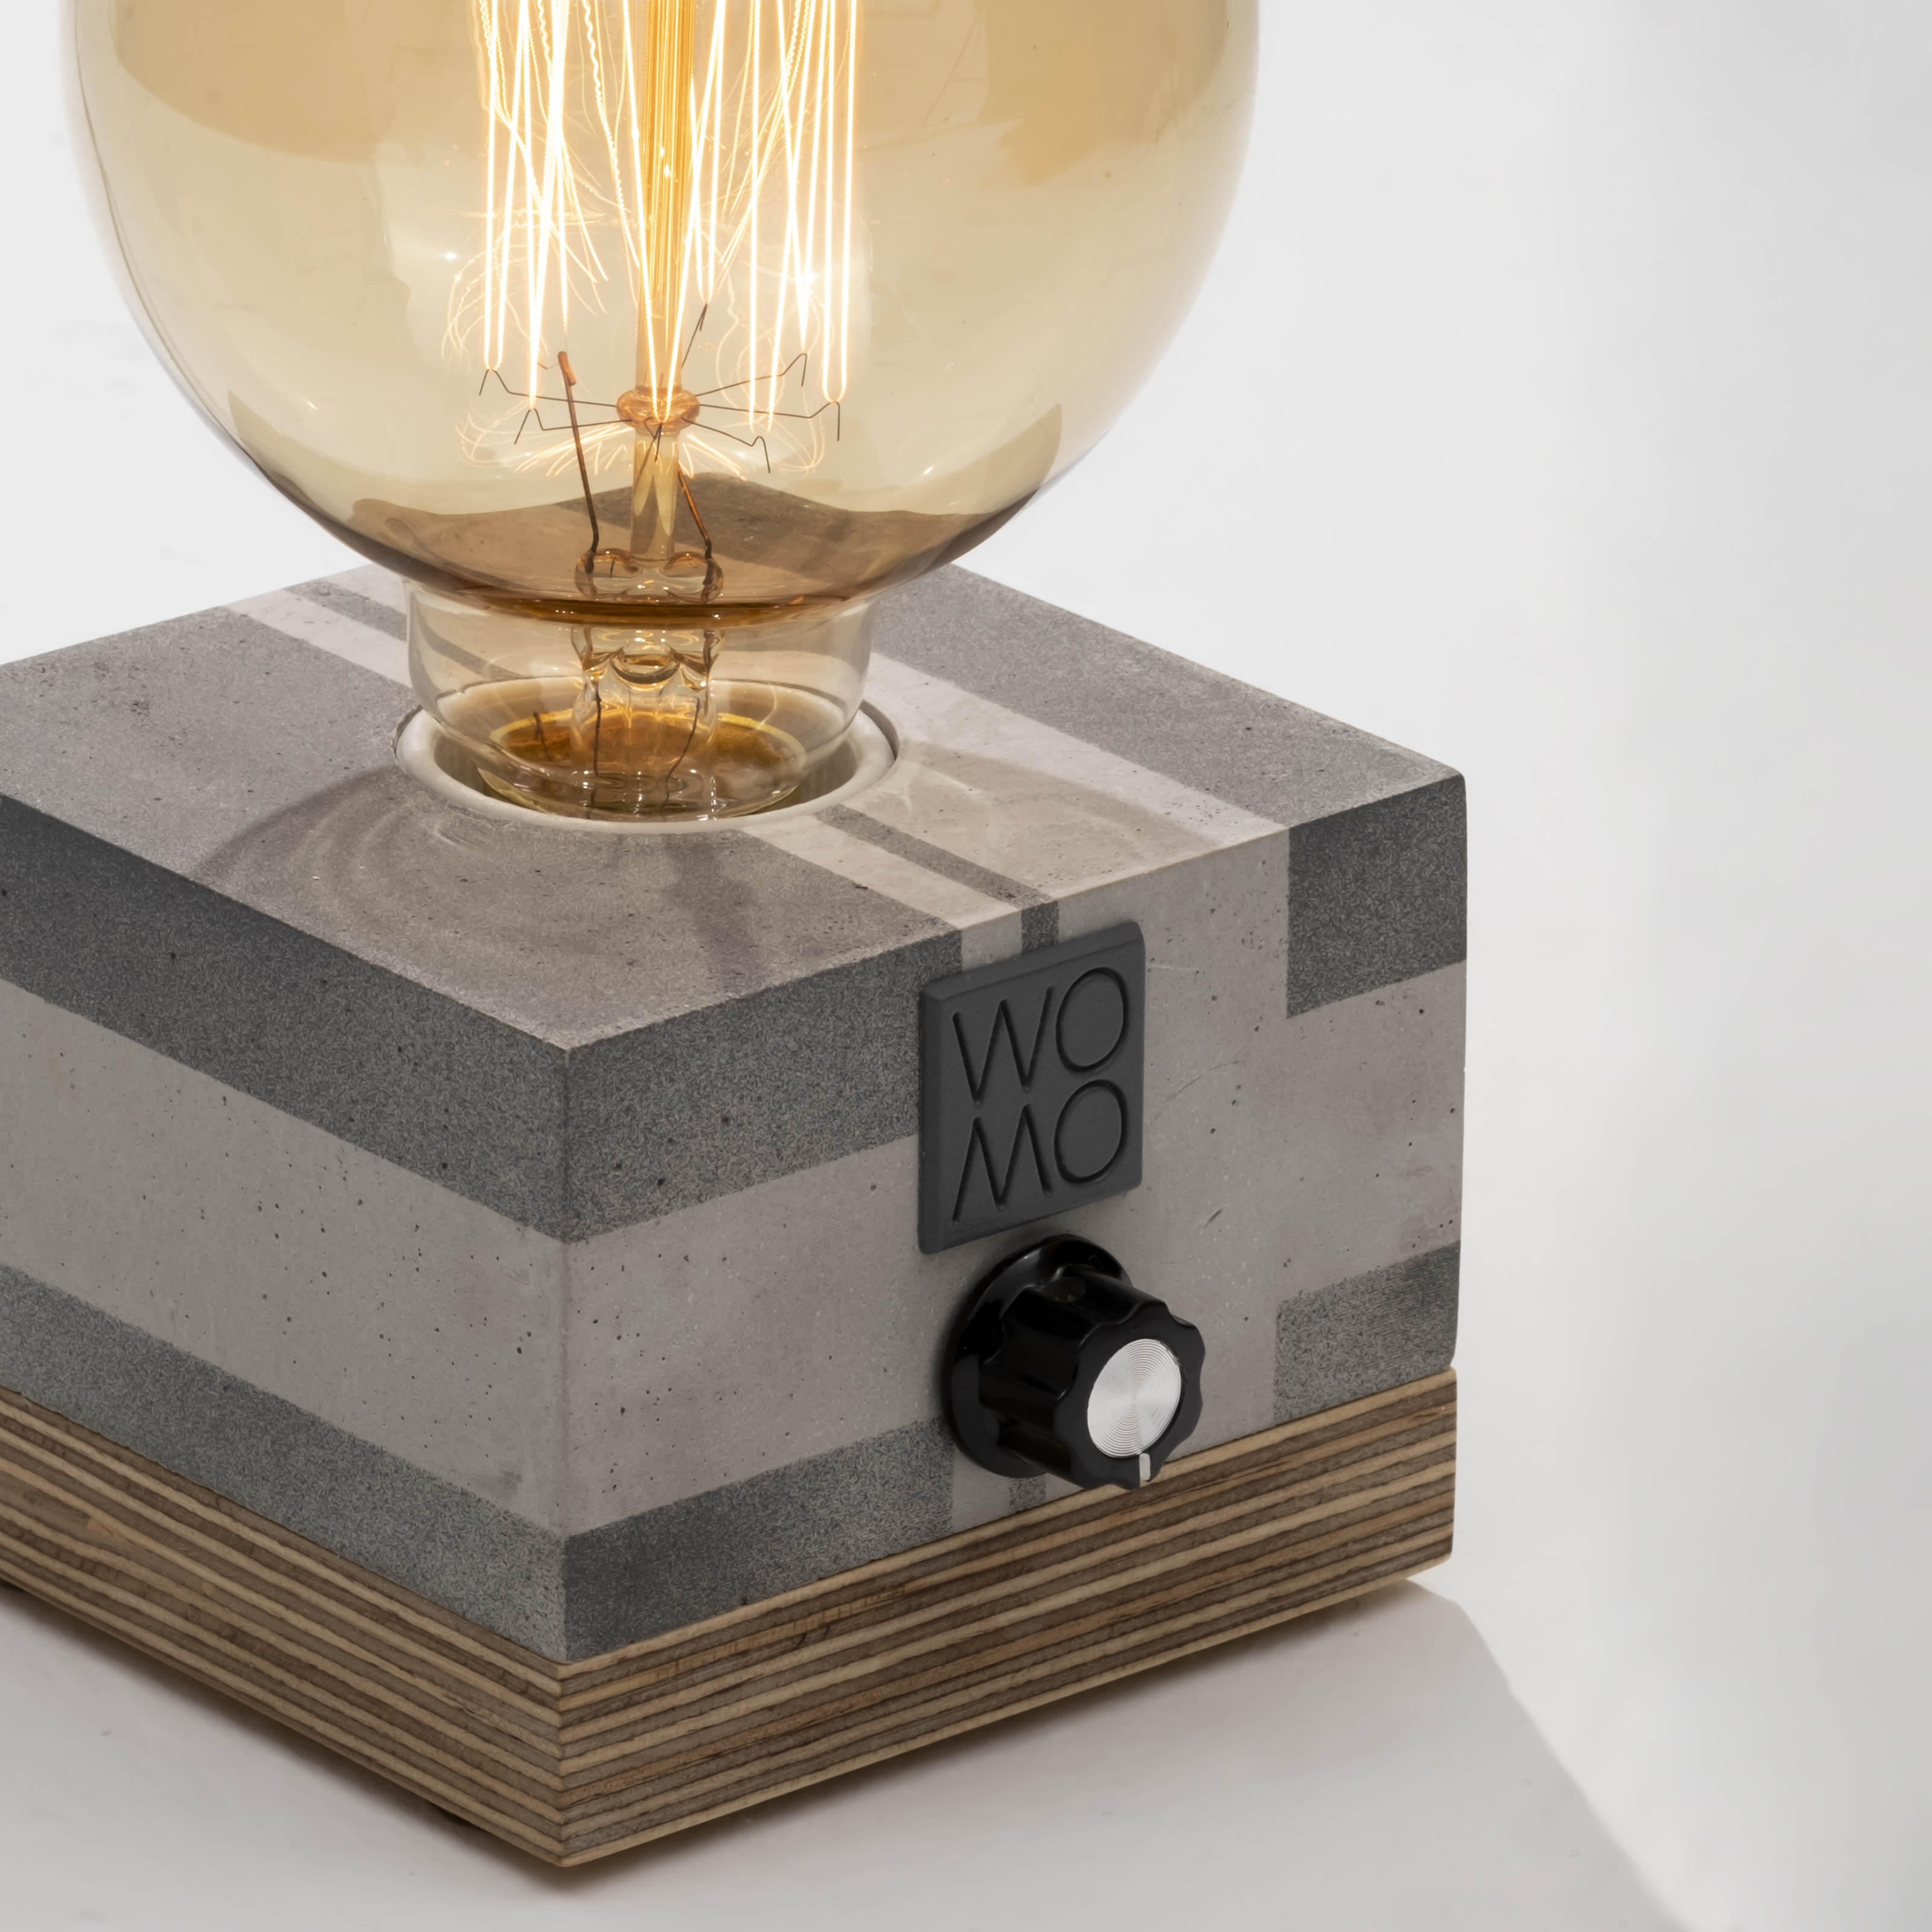 Circuit Antresit Concrete Table Lamp with Dimmer - Globe